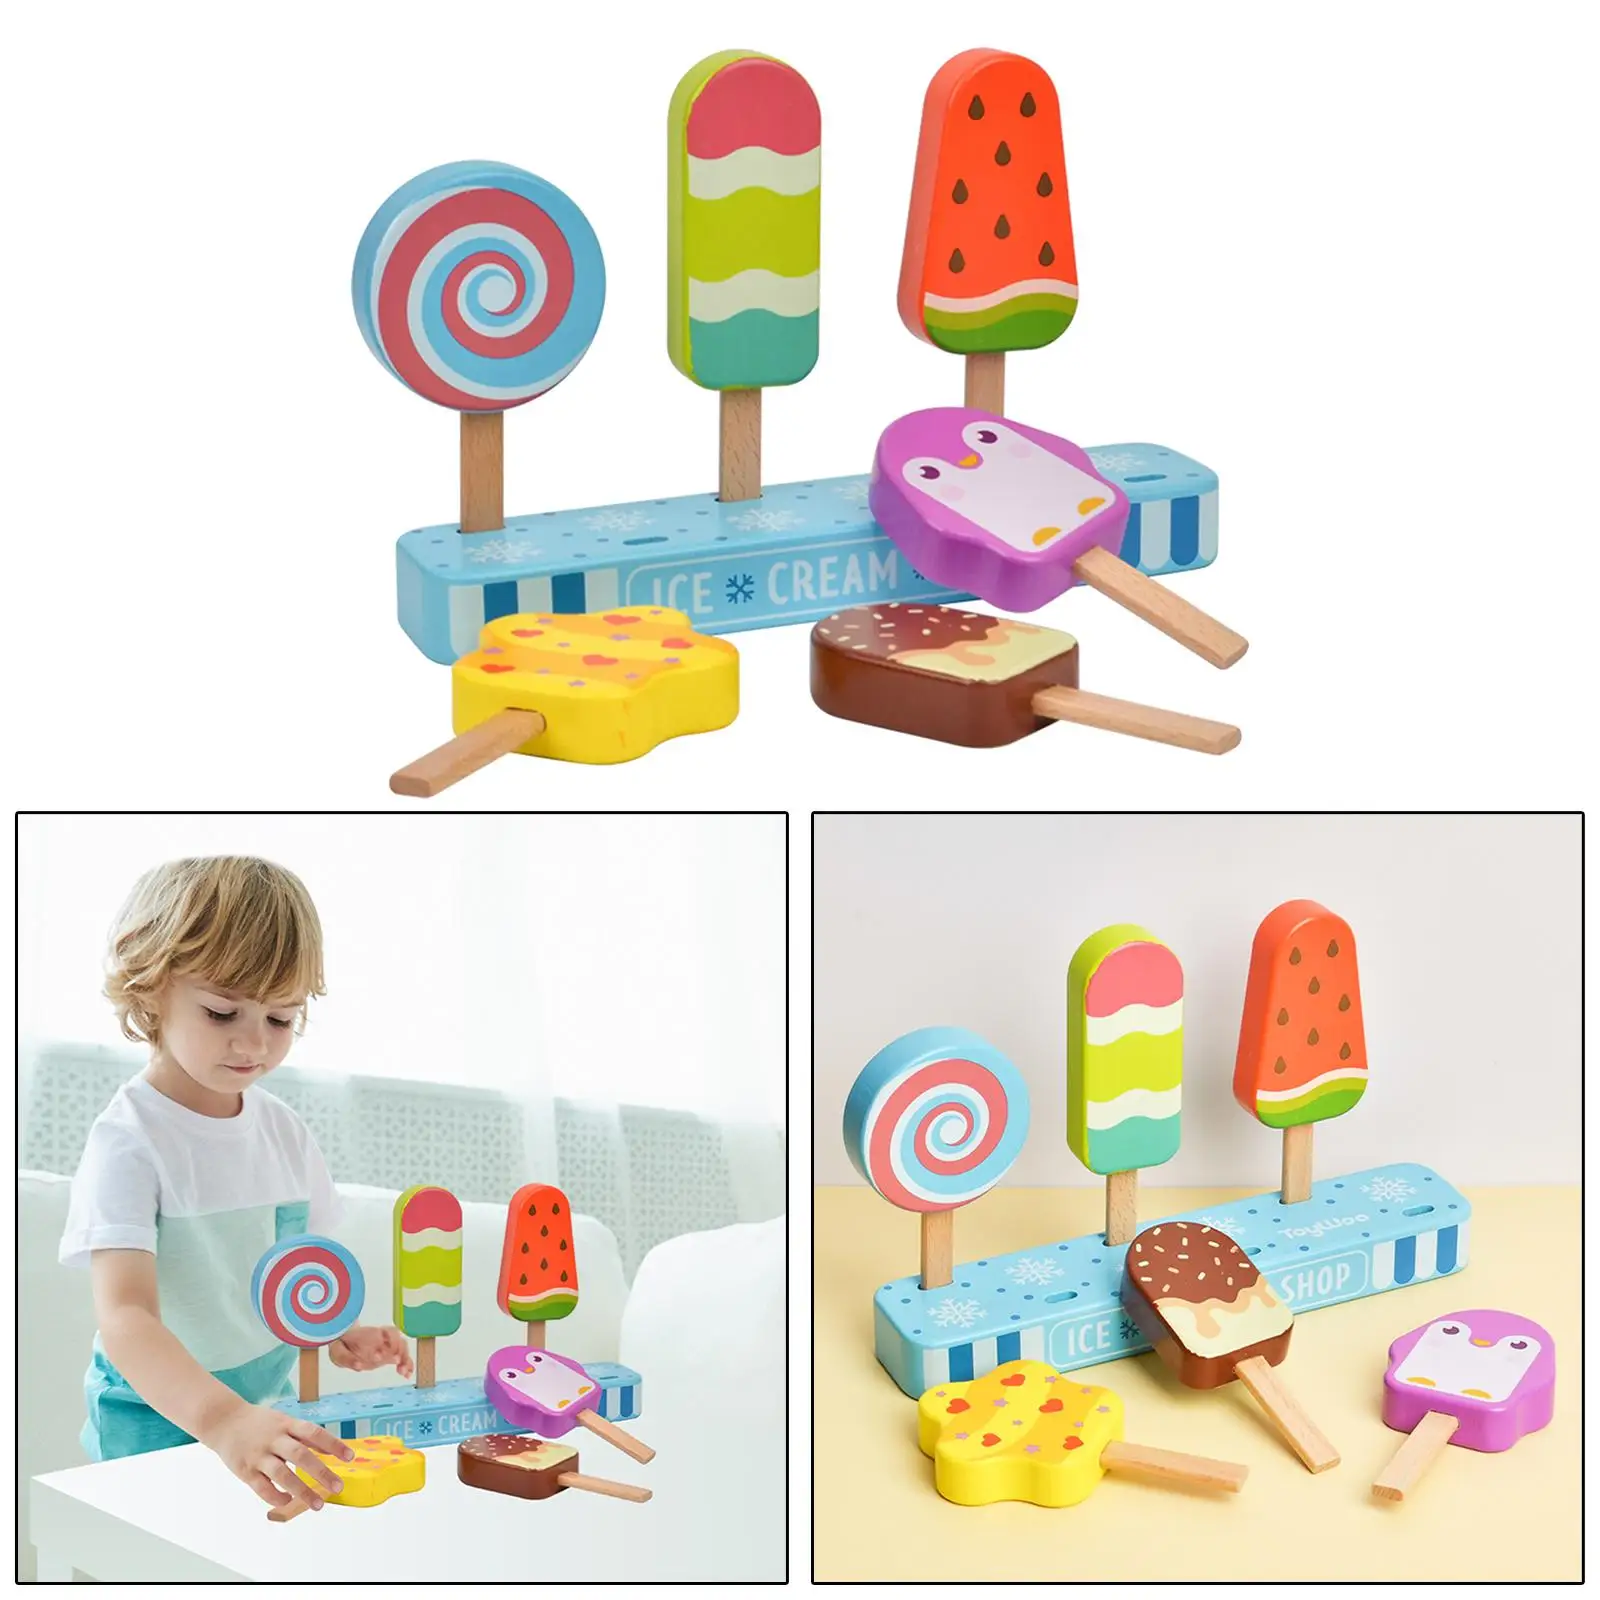 6Pcs Wooden Ice Cream Playset Pretend Play Food Set Educational Classic Toys for Boys and Girls Toddler Games Birthday Gifts